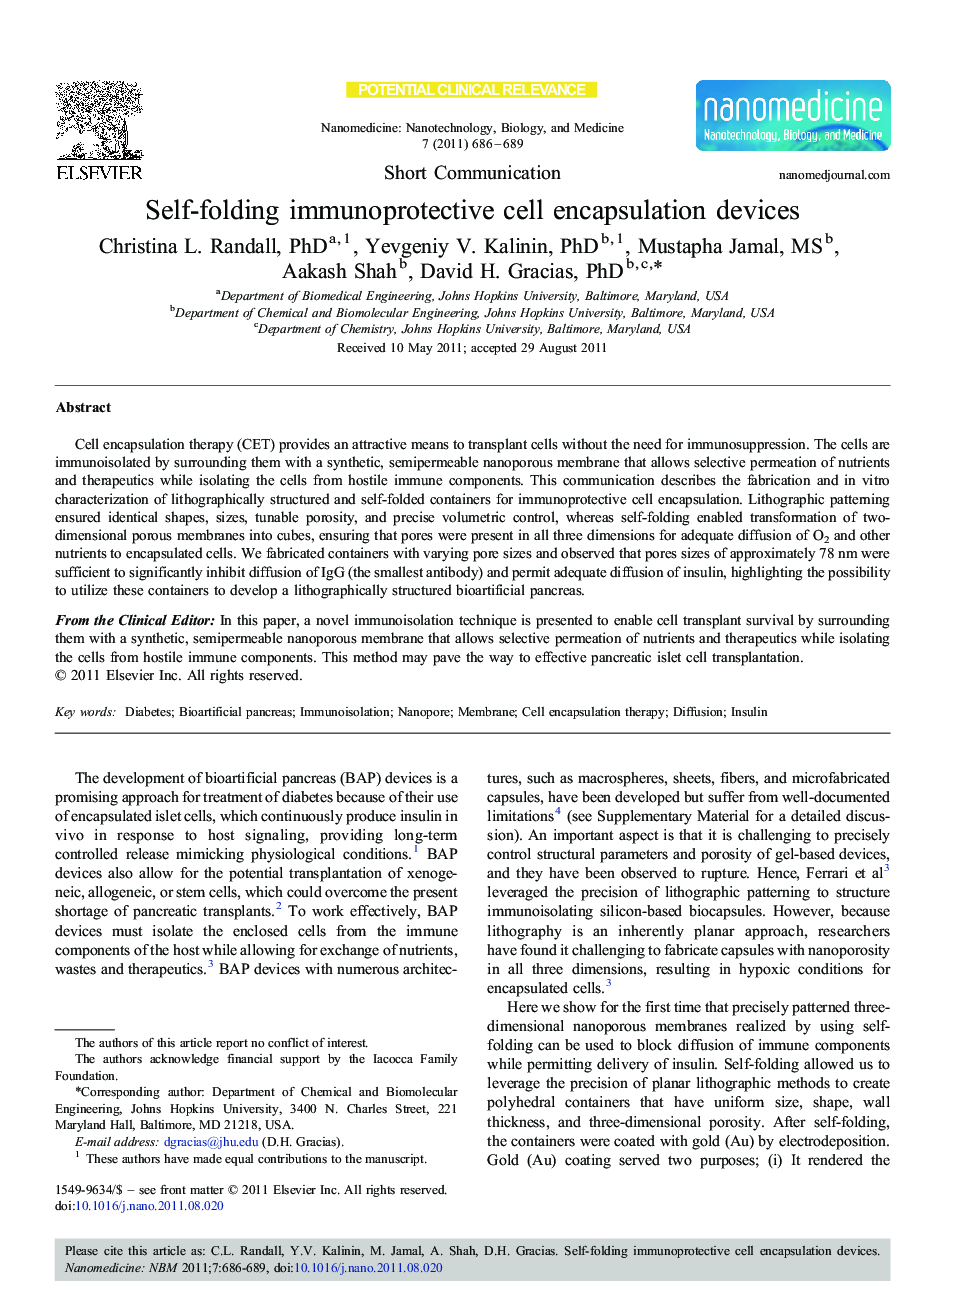 Self-folding immunoprotective cell encapsulation devices